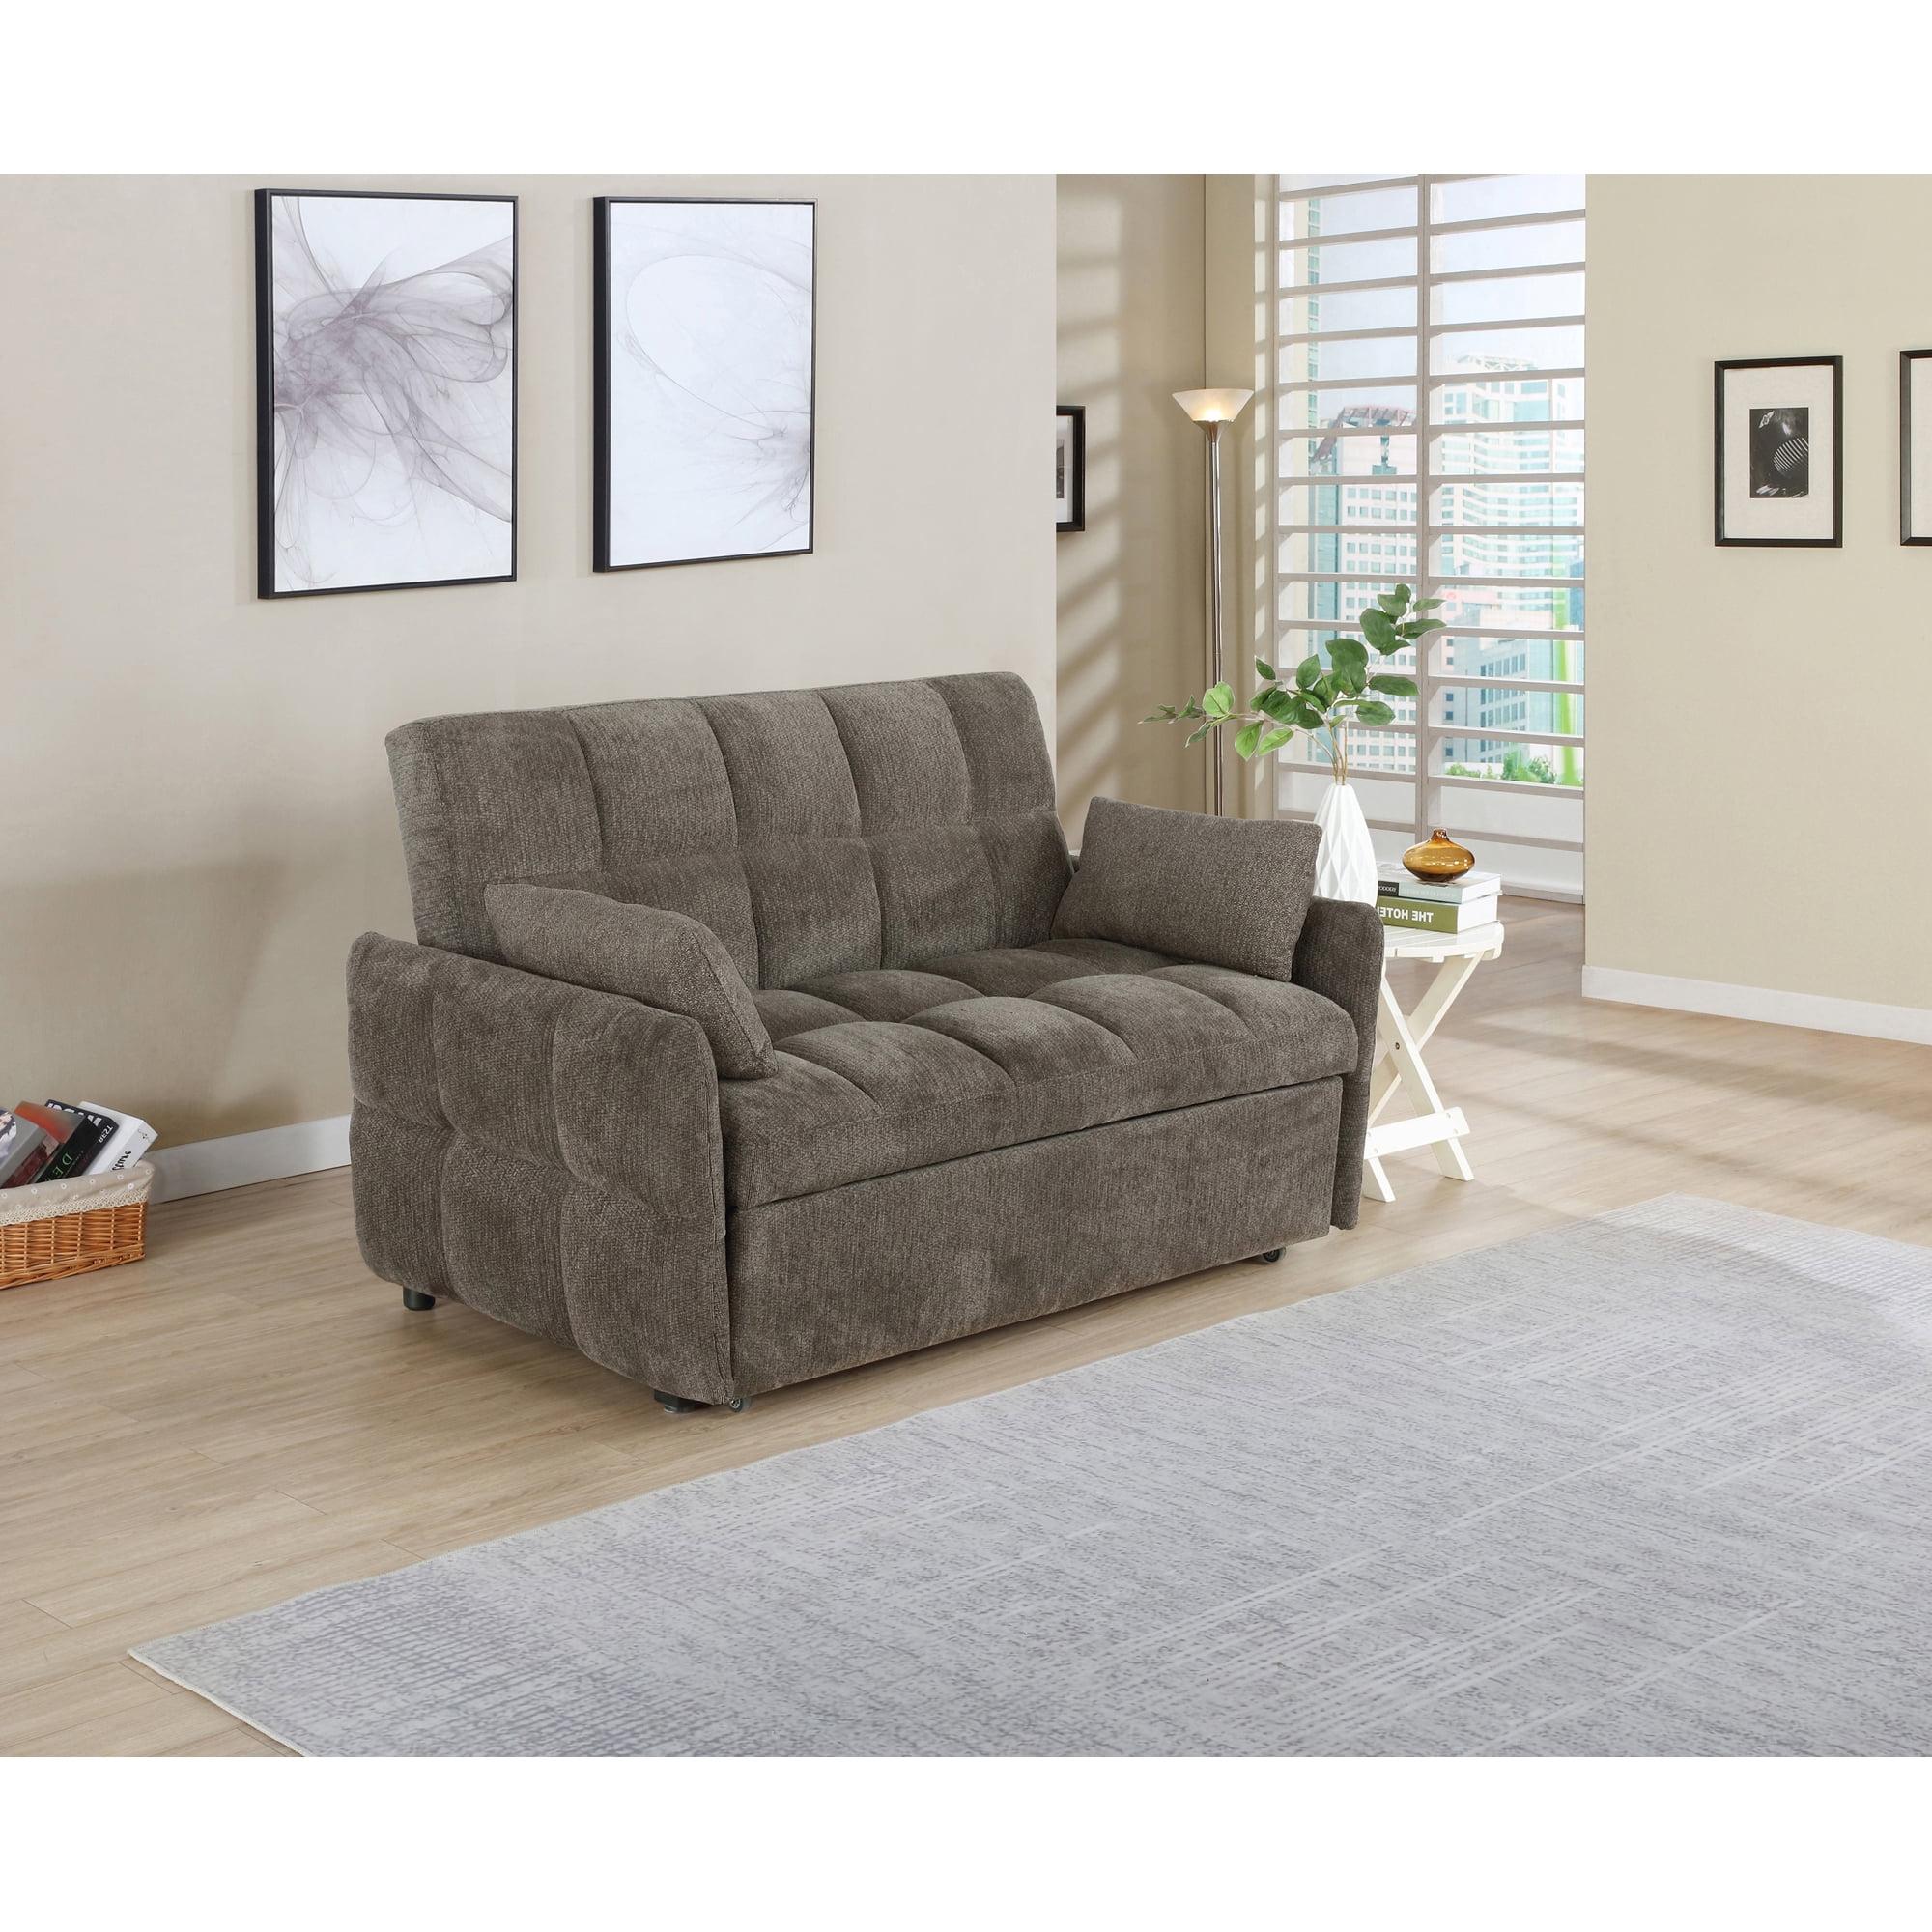 Cotswold Transitional Brown Tufted Fabric Sleeper Sofa